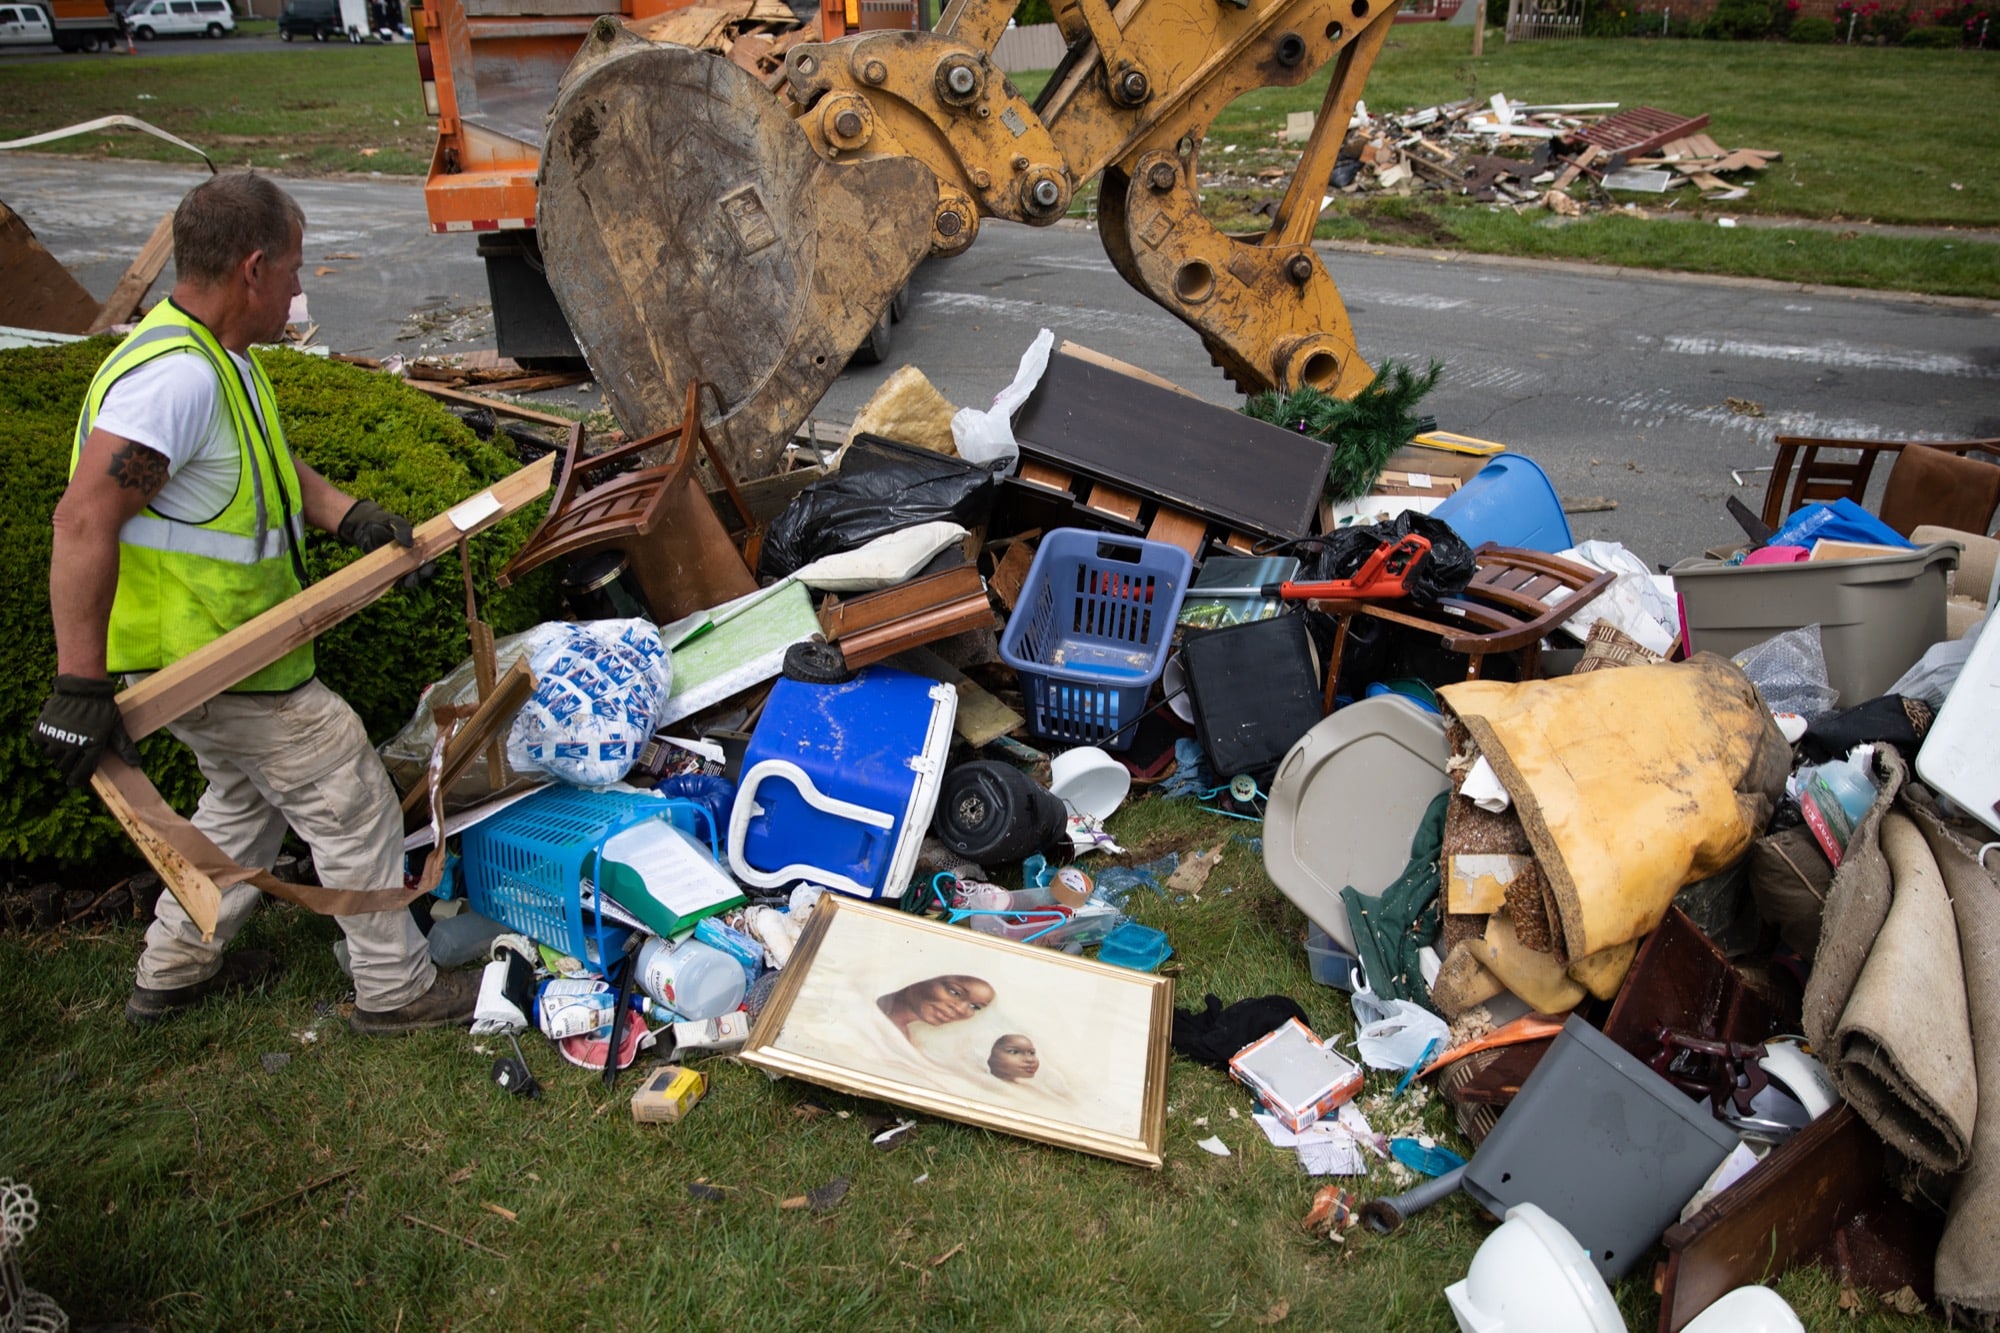 Phil Sloan, a worker from adjacent Butler County, Ohio, sorts through ruined belongings that Dayton residents have set out for removal. “I just feel bad. That’s a lifetime of stuff laying out here in a pile,” Sloan said.  (Stacy Fernández/News21)